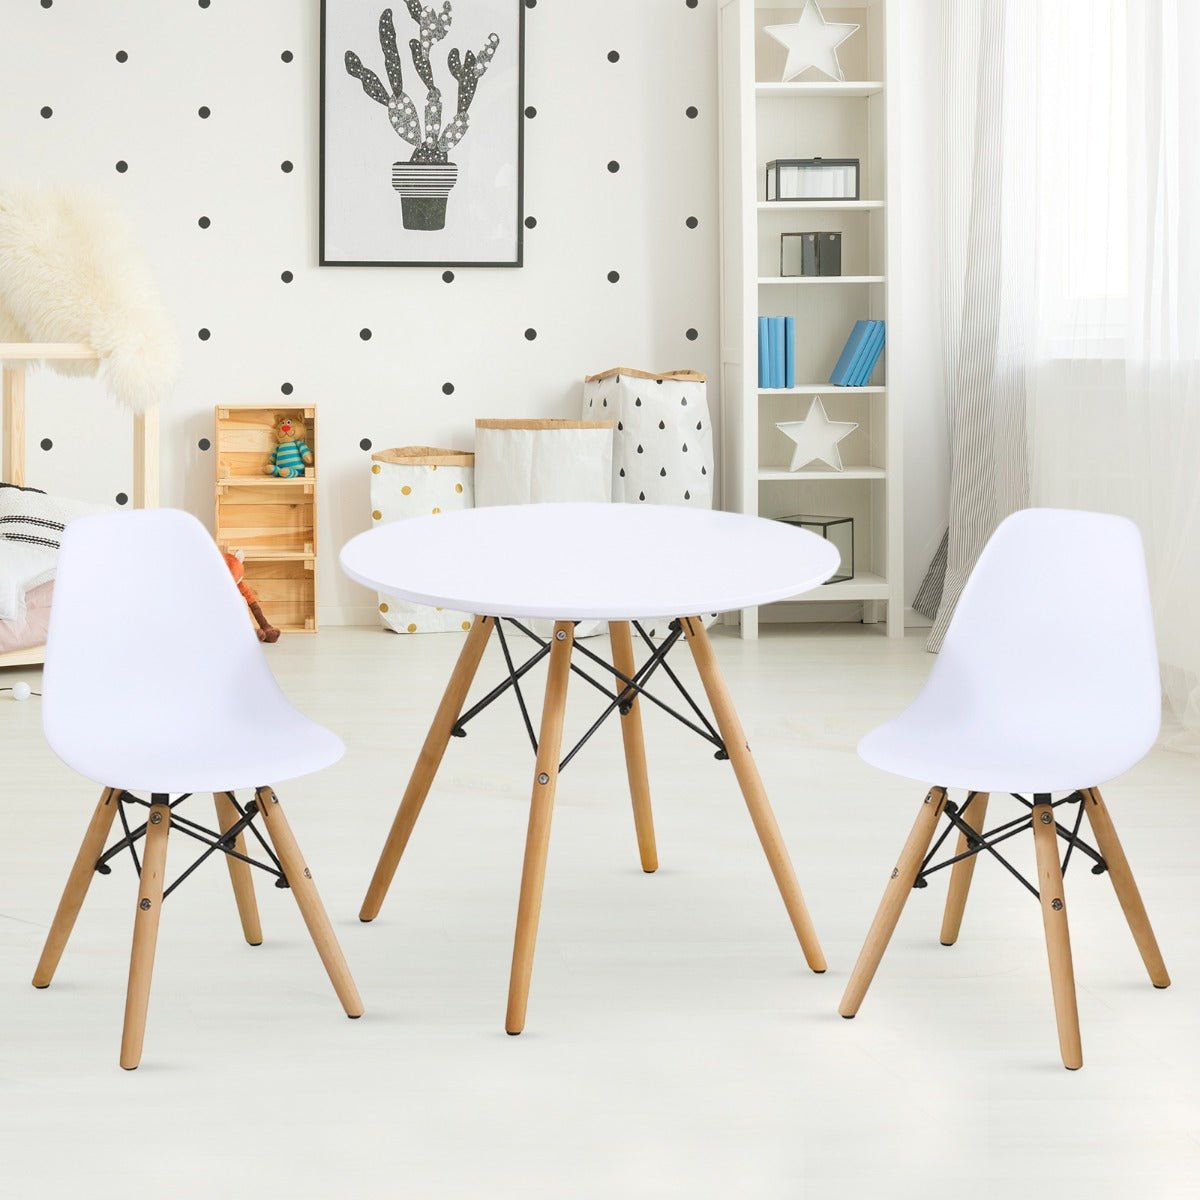 Modern 3-Piece Kids Table and Chairs Set - Stylish Furniture for Toddlers